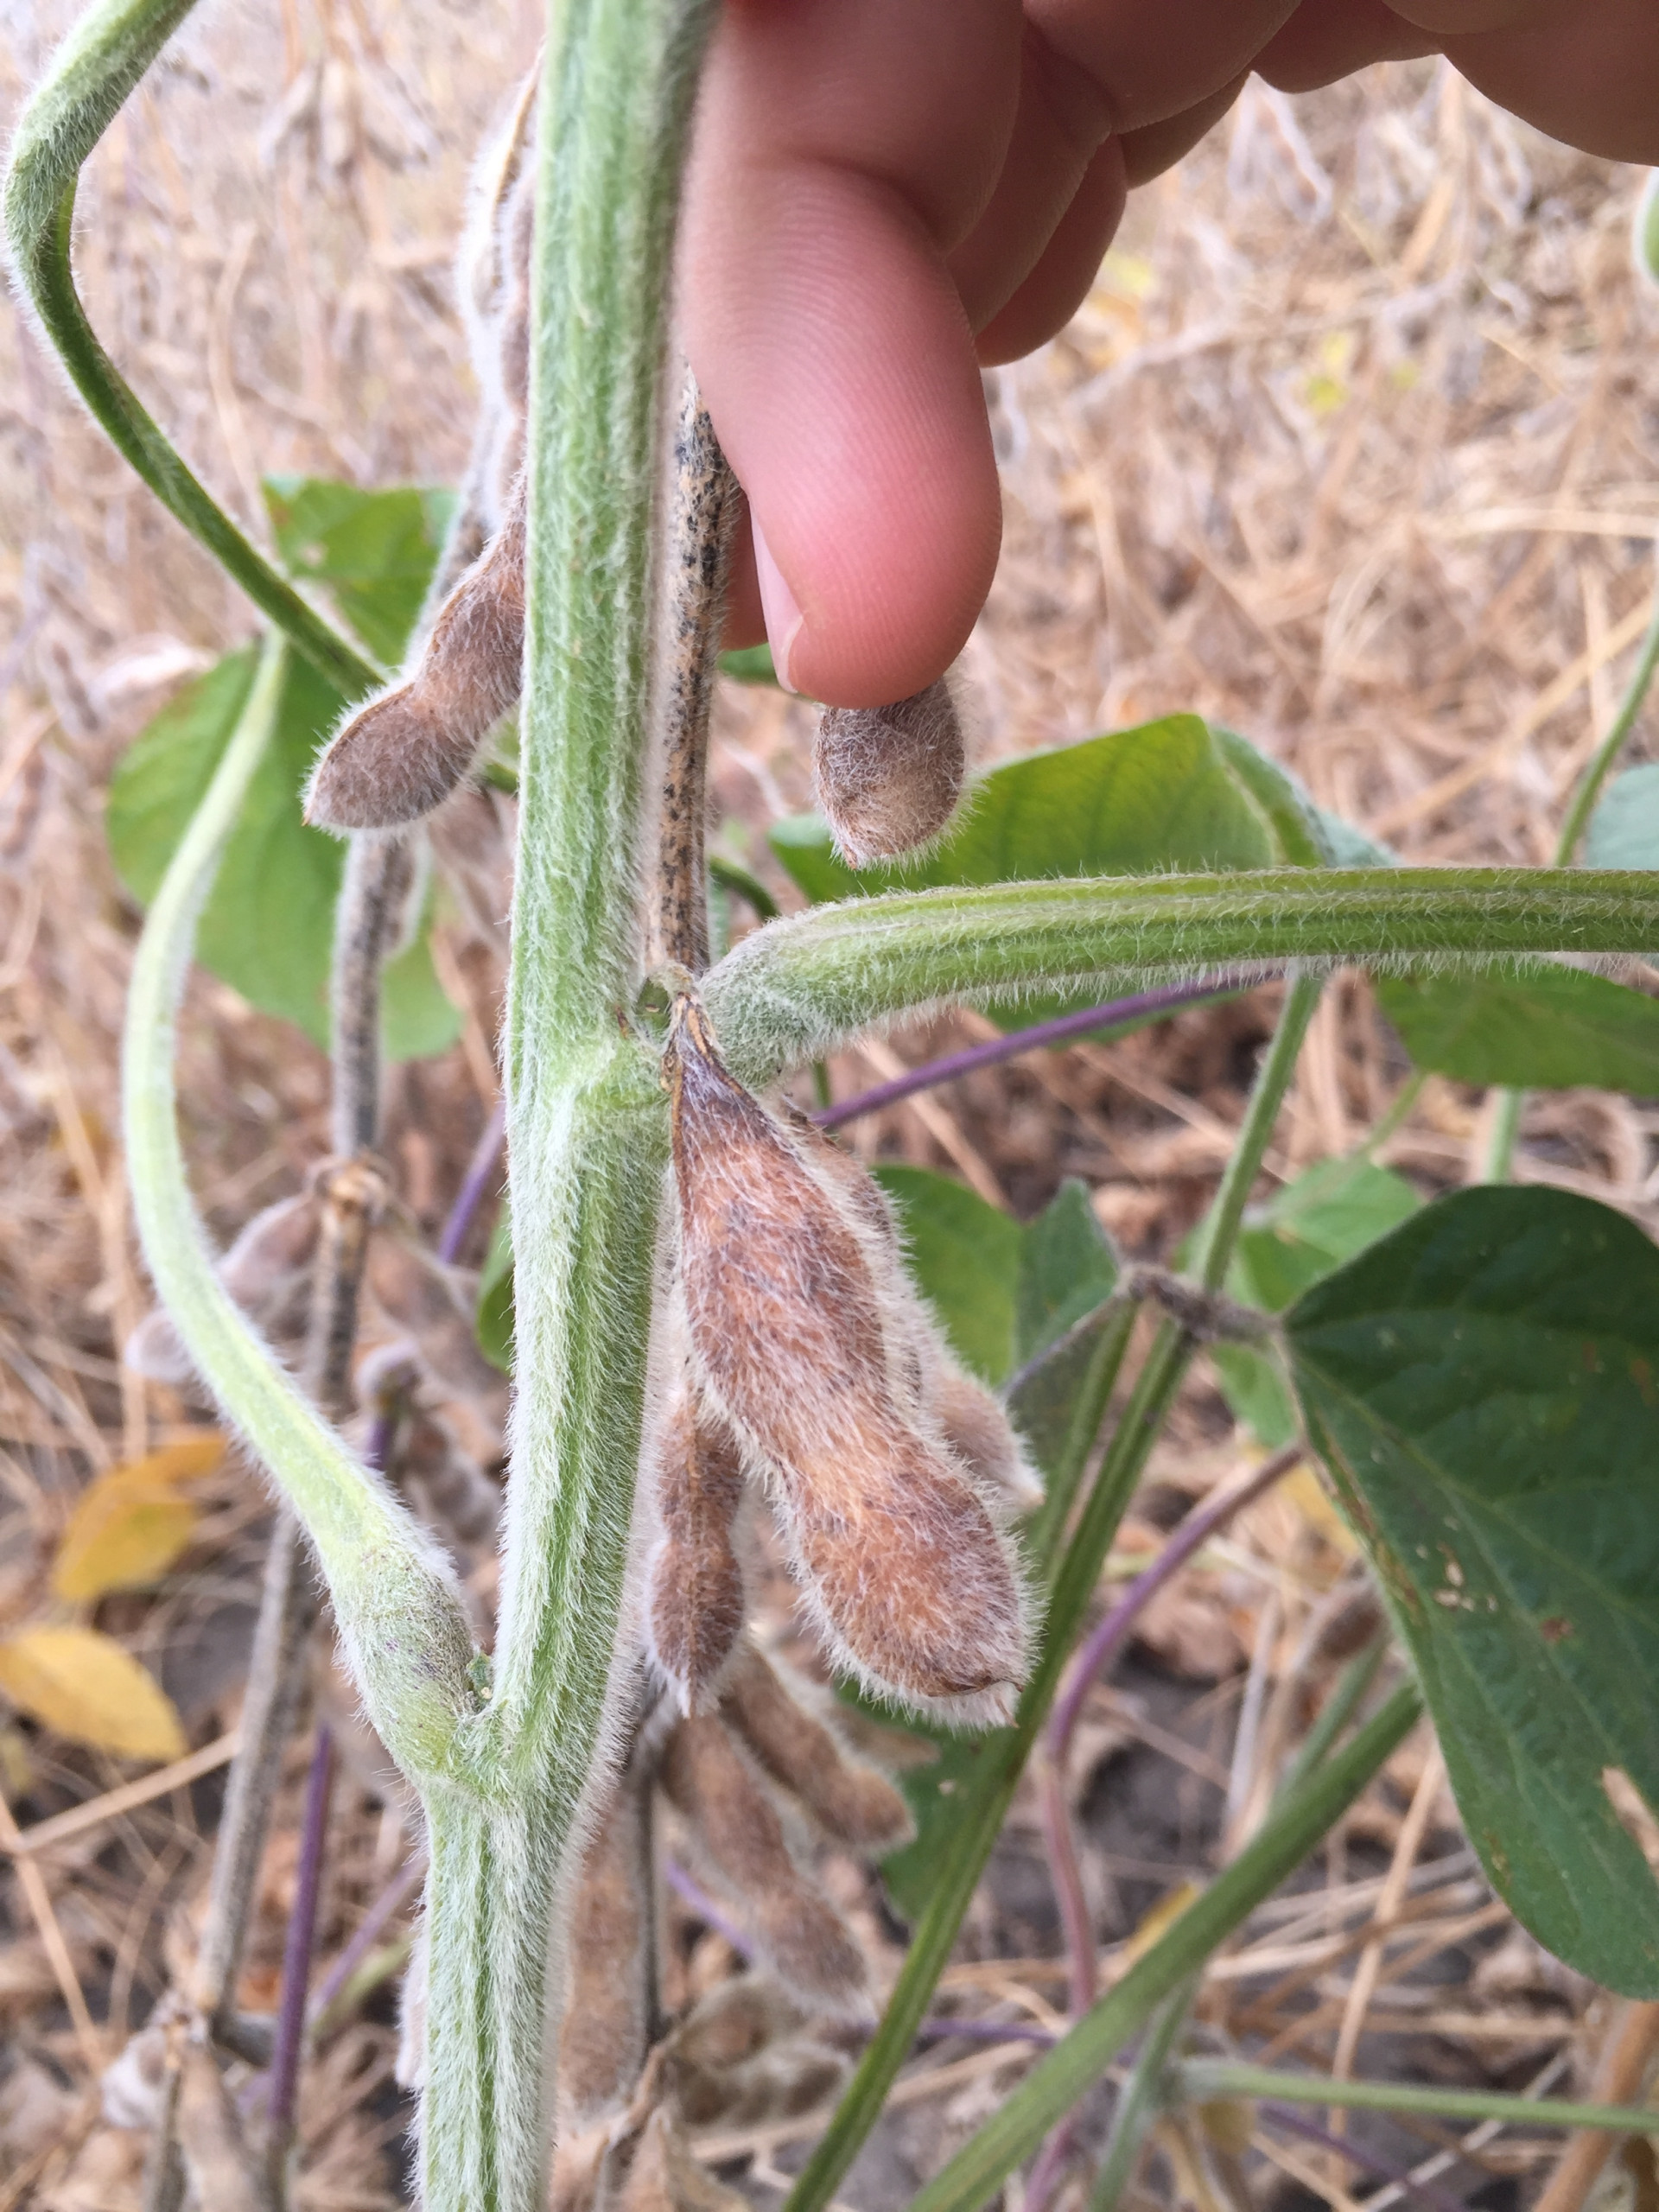 Green stems appear in soybeans again